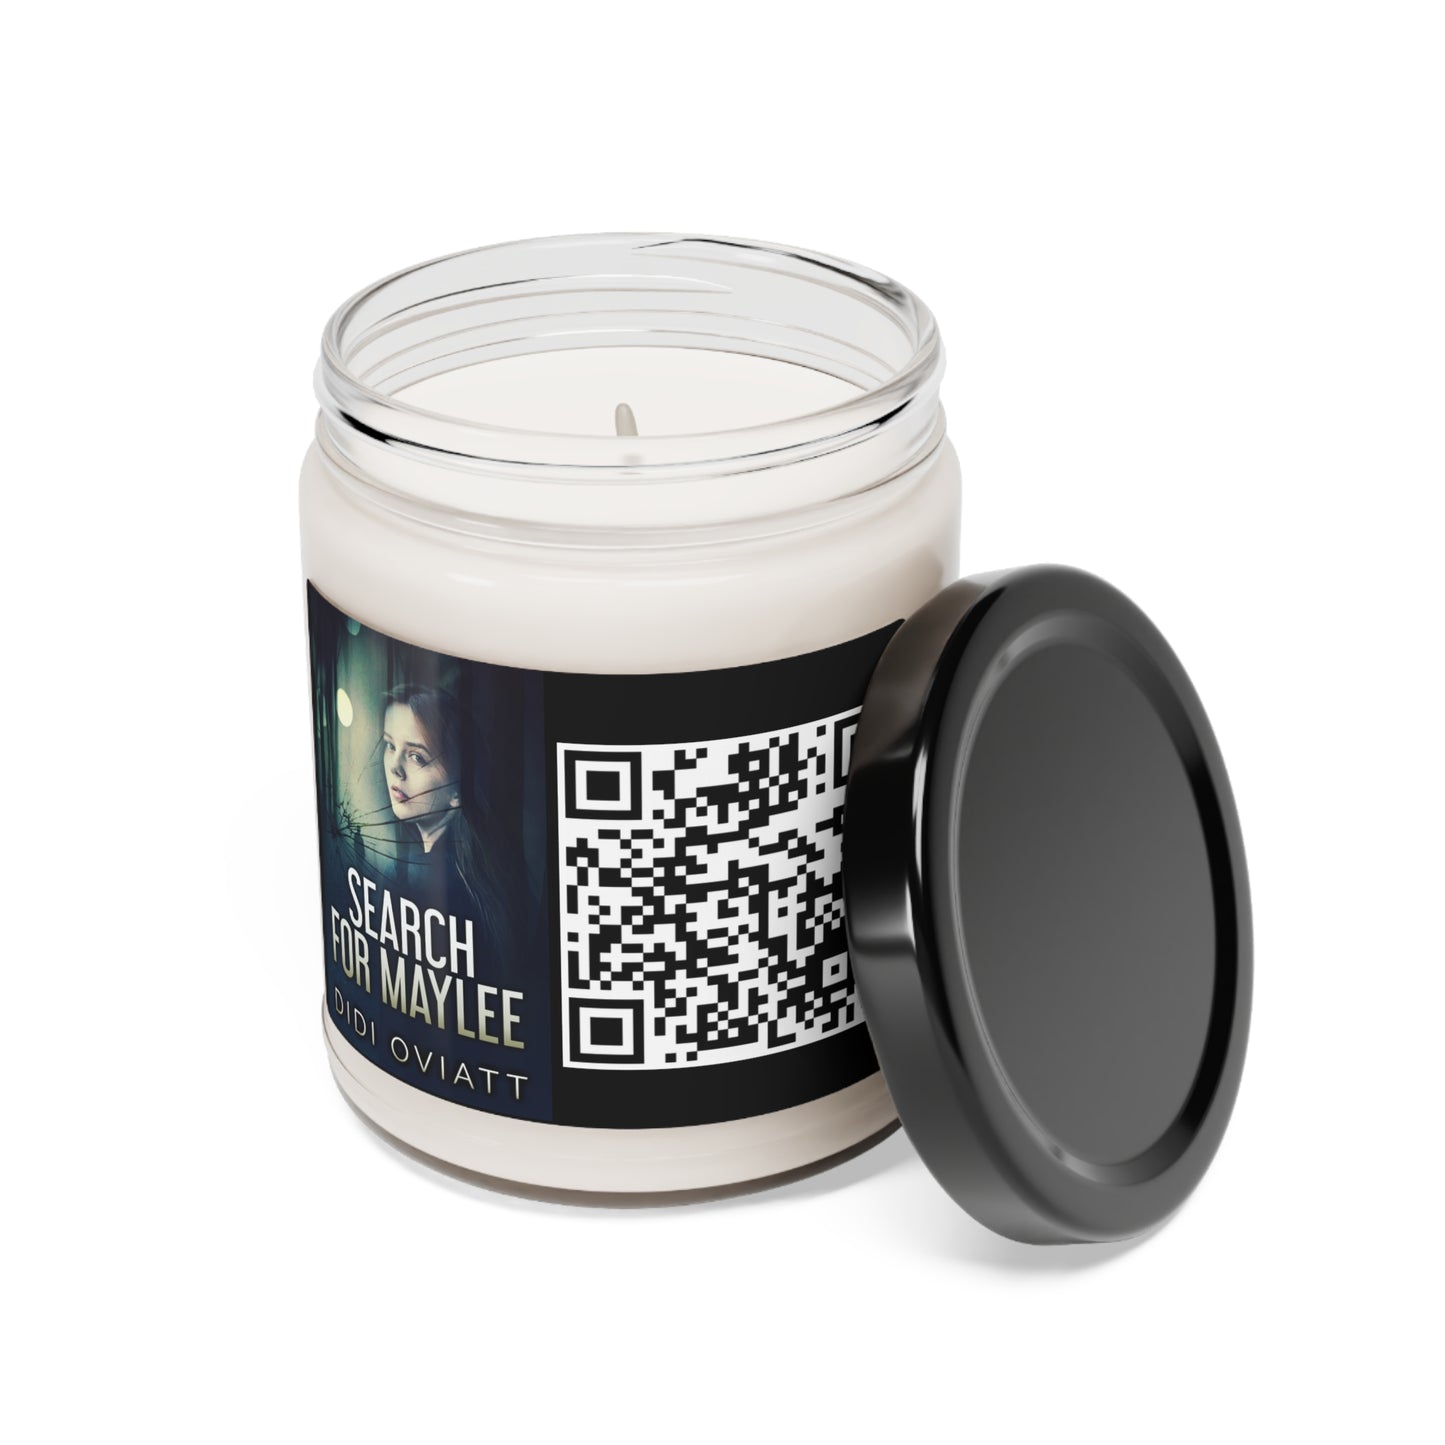 Search for Maylee - Scented Soy Candle